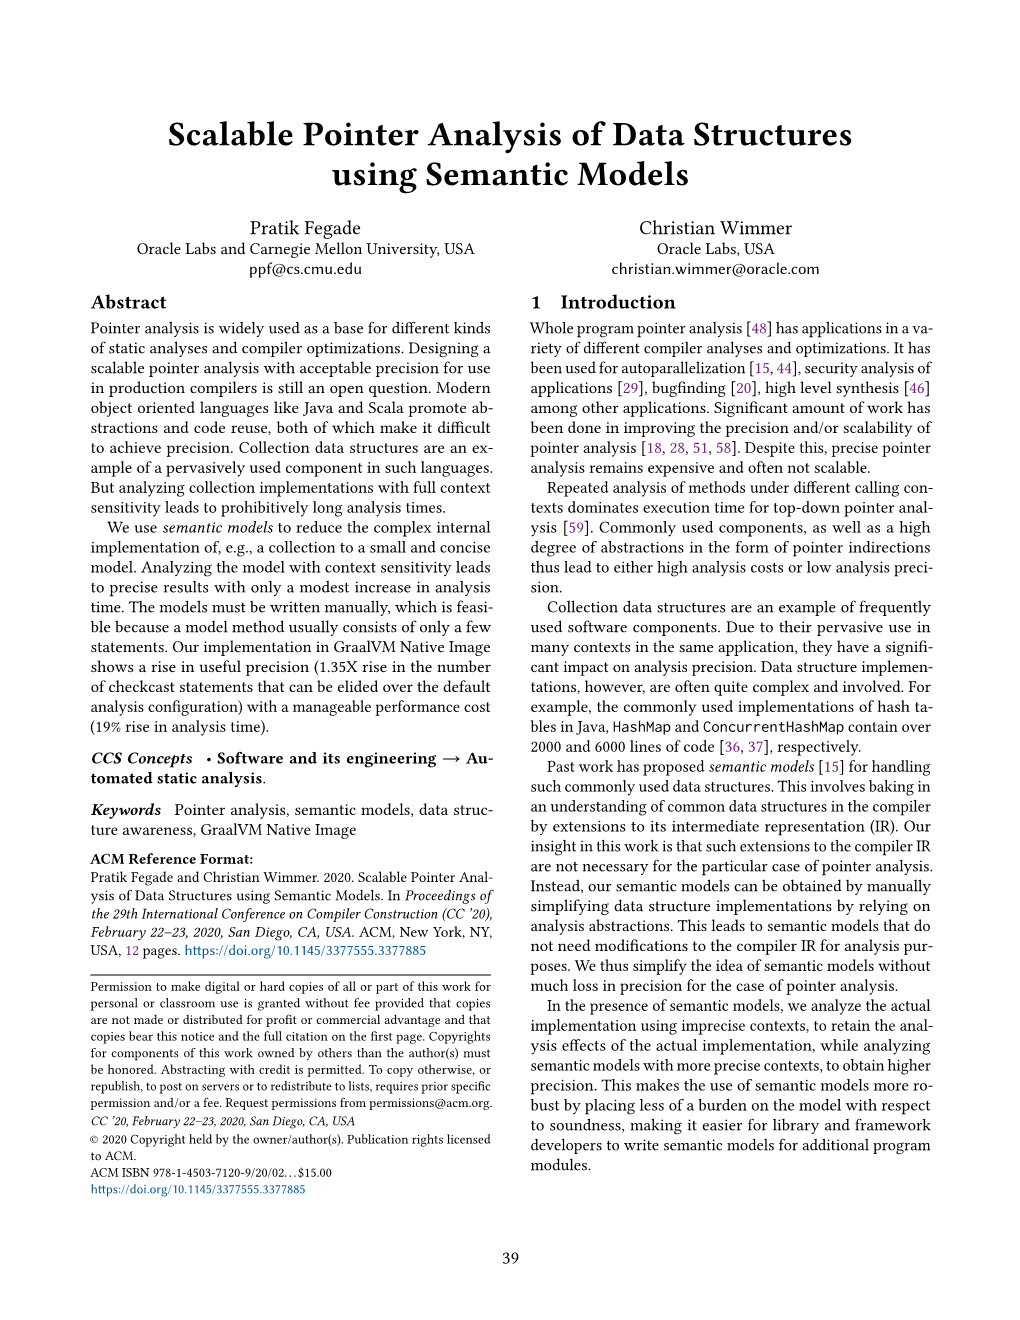 Scalable Pointer Analysis of Data Structures Using Semantic Models